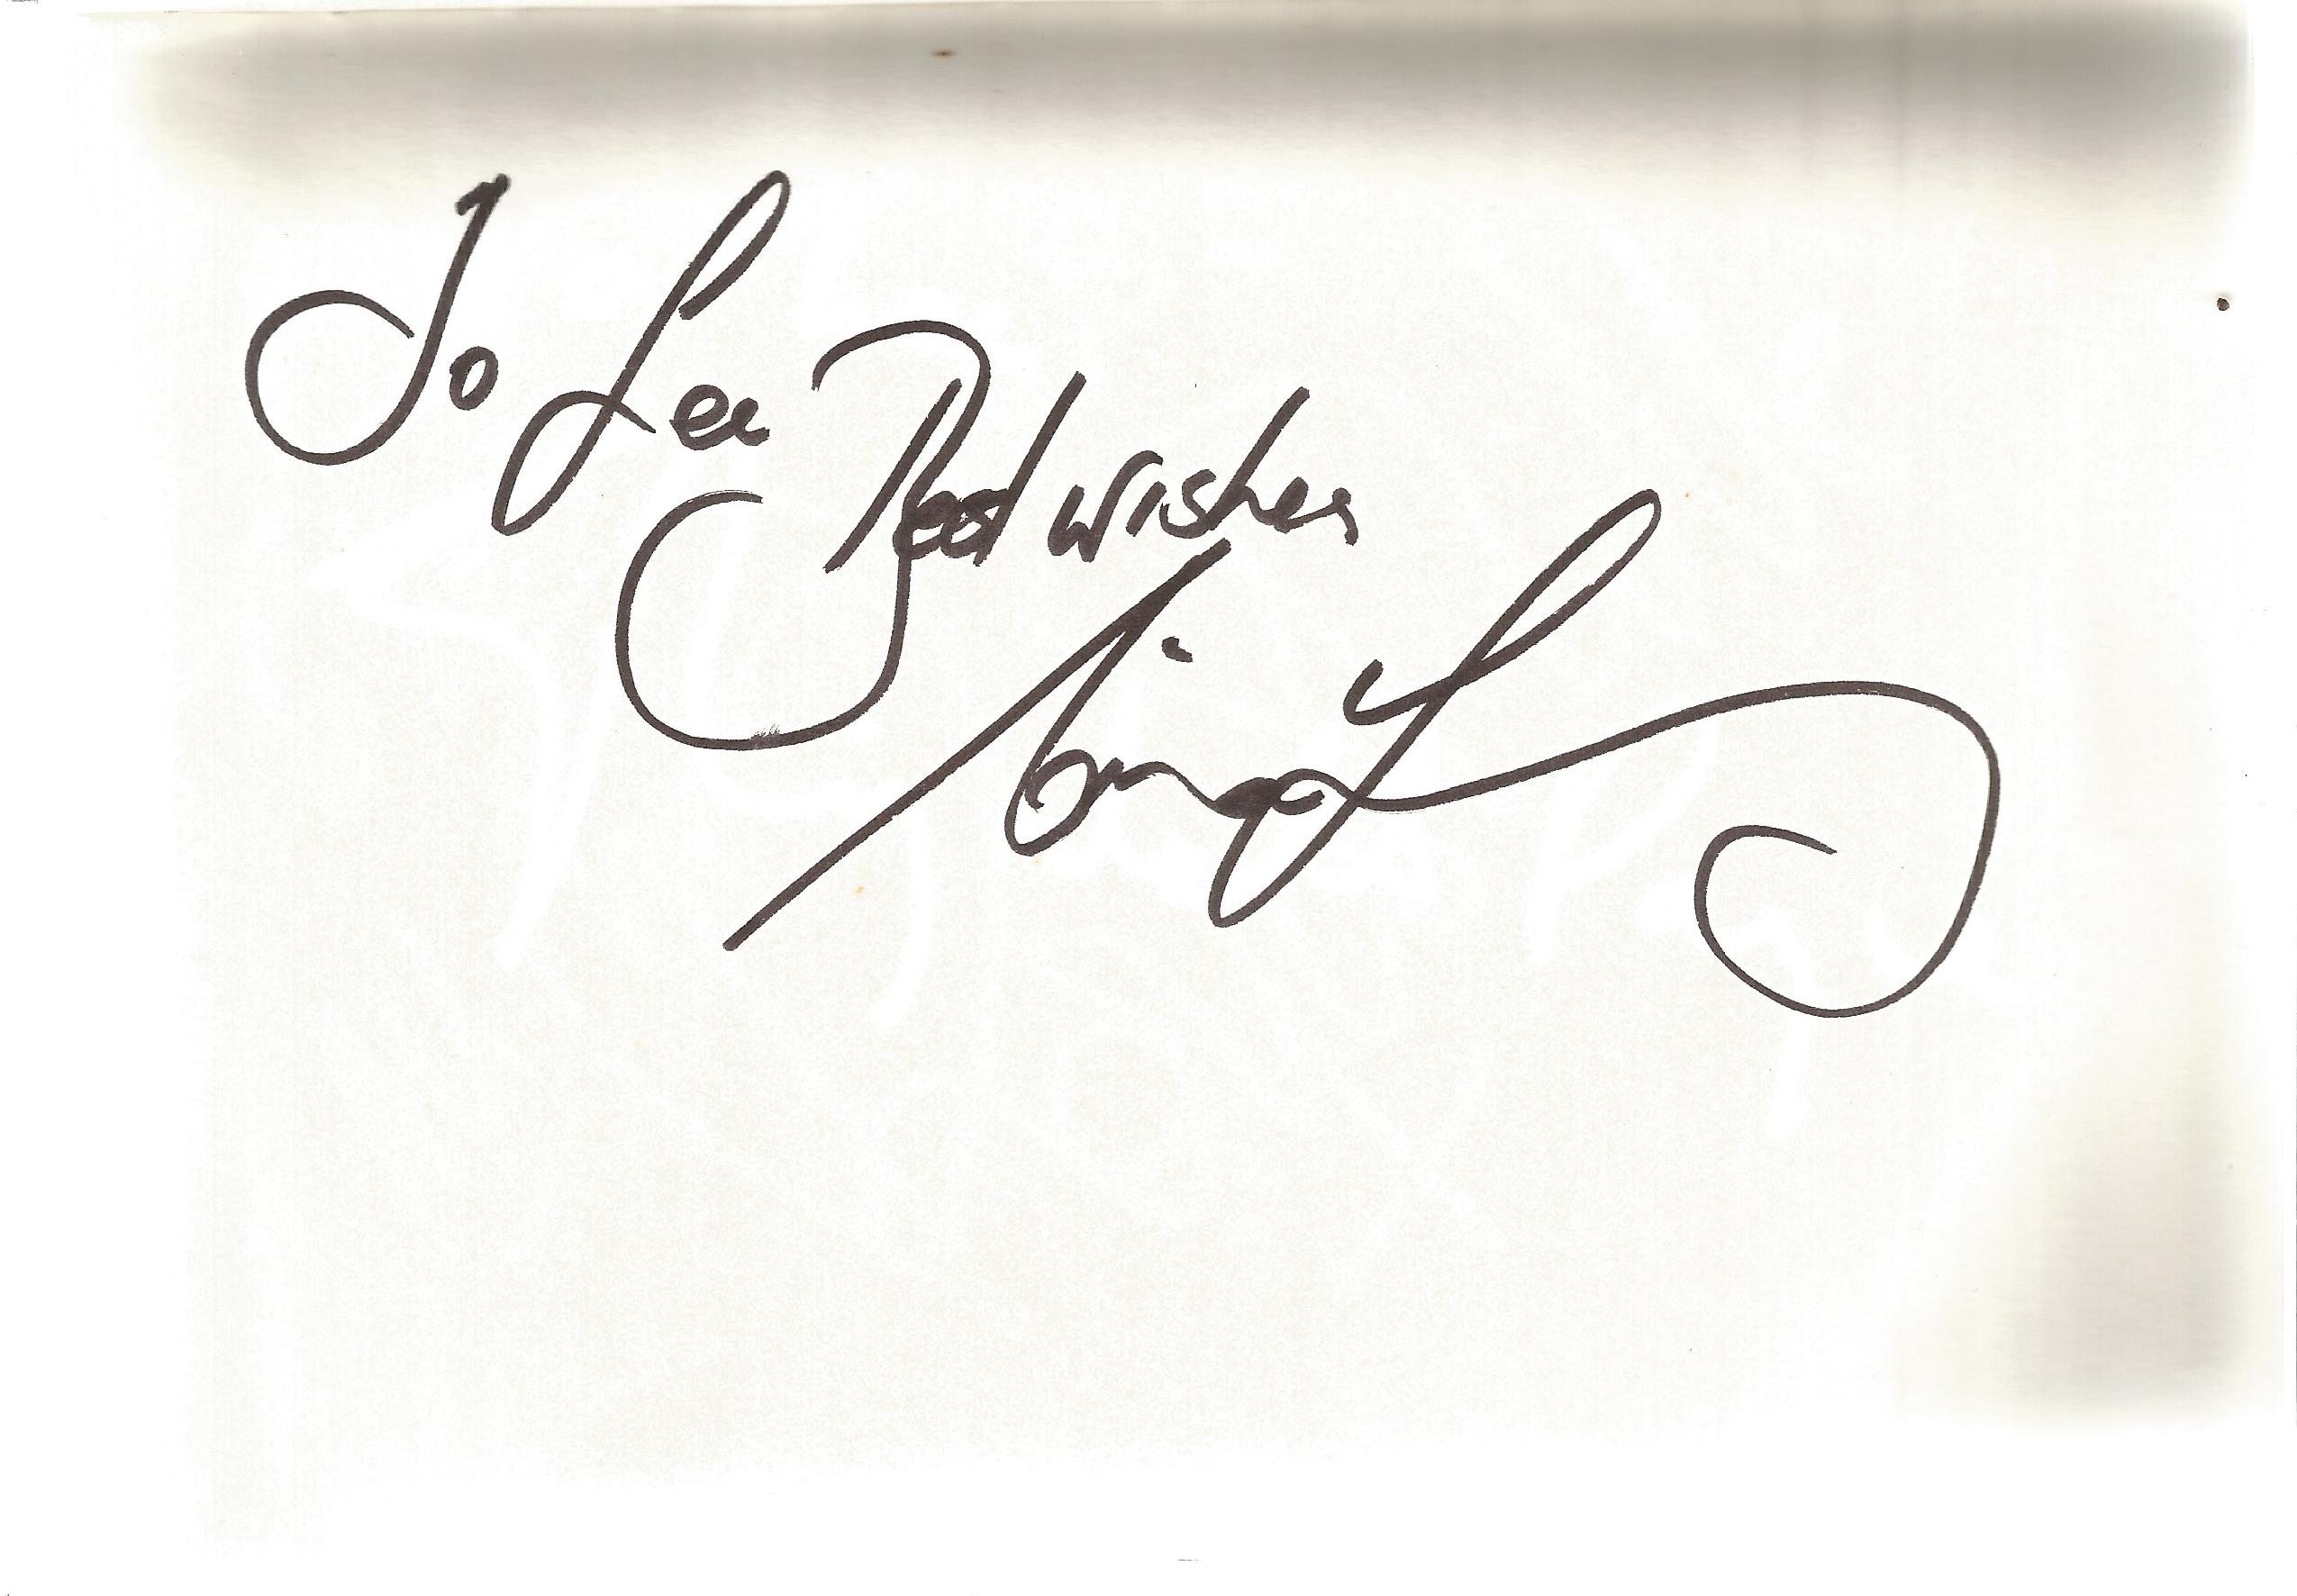 Autograph book with 50+ signatures on 8x6 pages. Some of signatures included are Tom Conti, Royce - Image 2 of 6